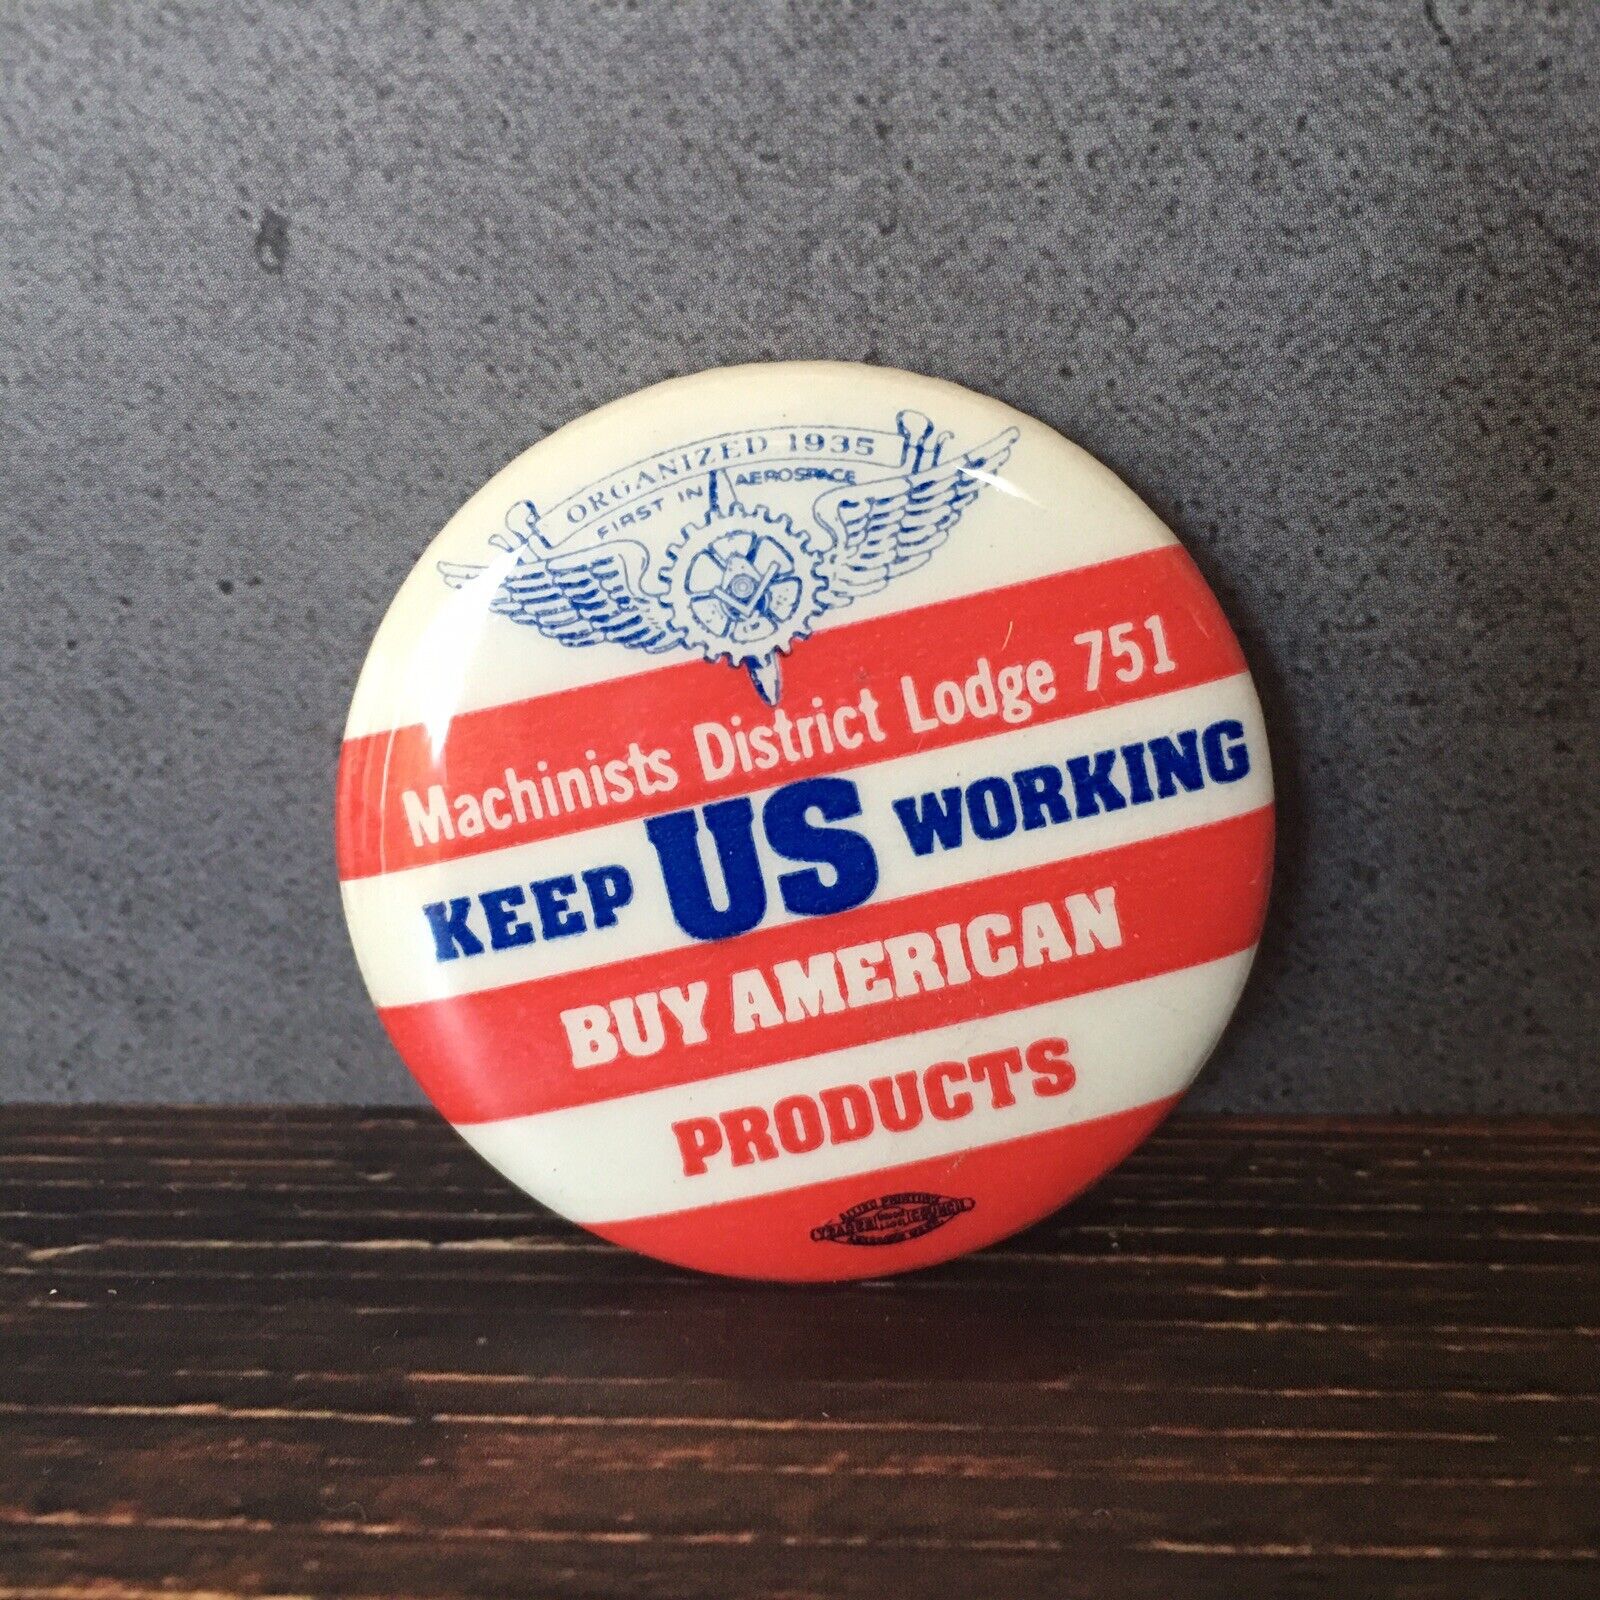 Vintage Keep US Working Buy American Products Machinists District Lodge 751 Pin 